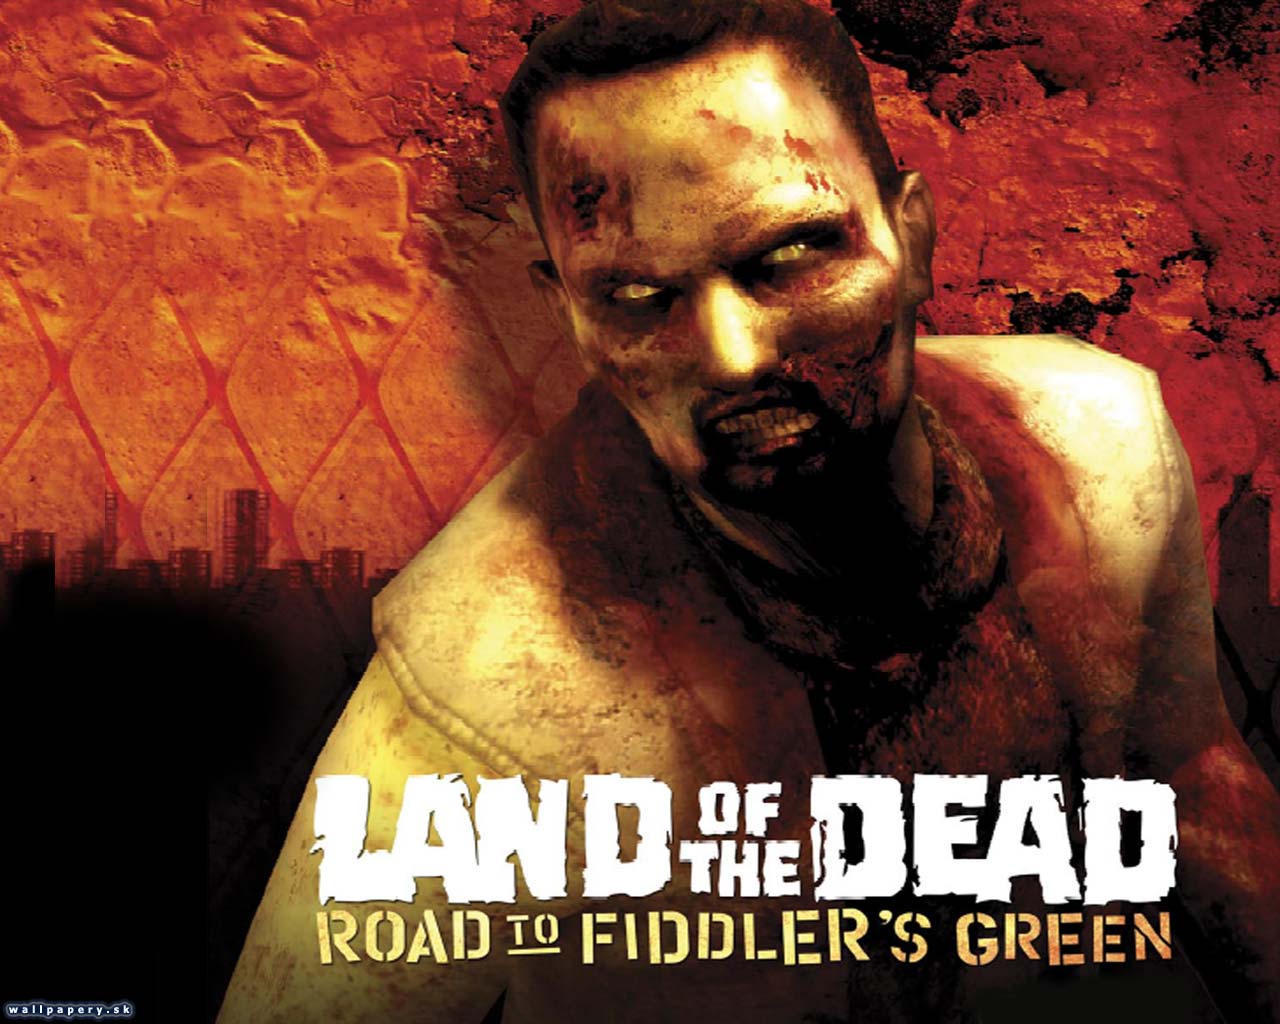 Land Of The Dead: Road to Fiddler's Green - wallpaper 1